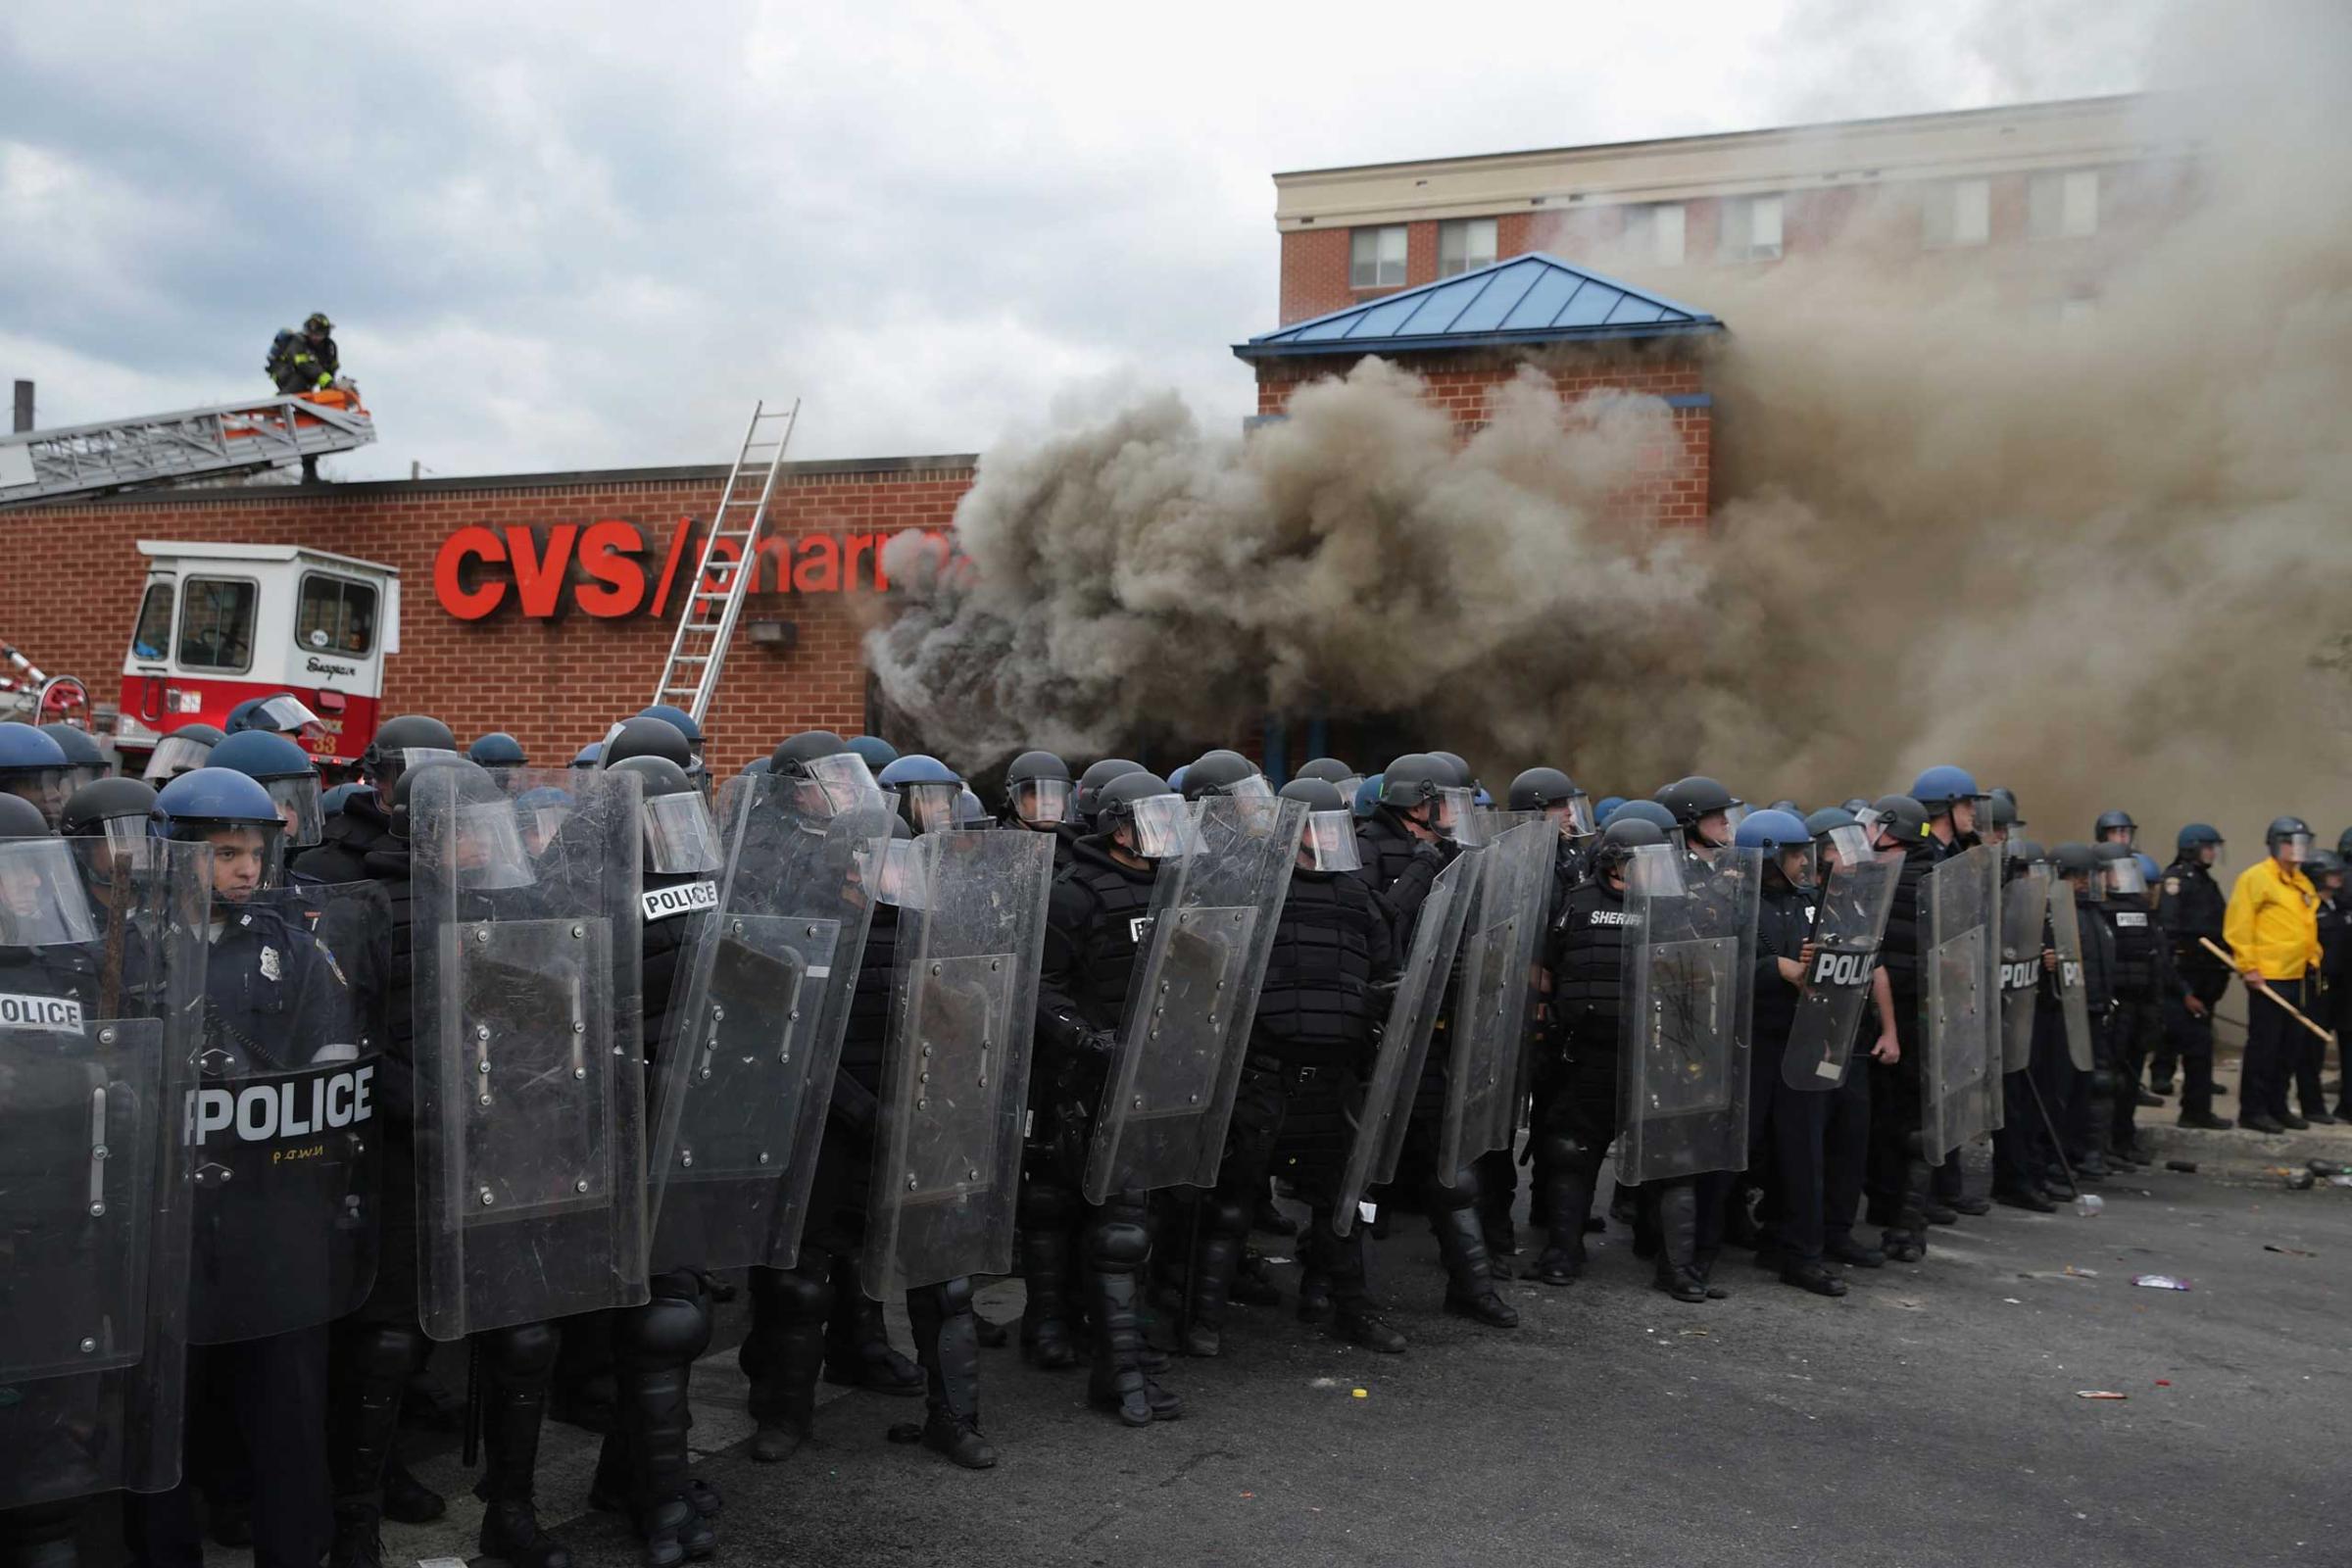 Baltimore Police form a perimeter around a CVS pharmacy that was looted and burned in Baltimore on April 27, 2015.